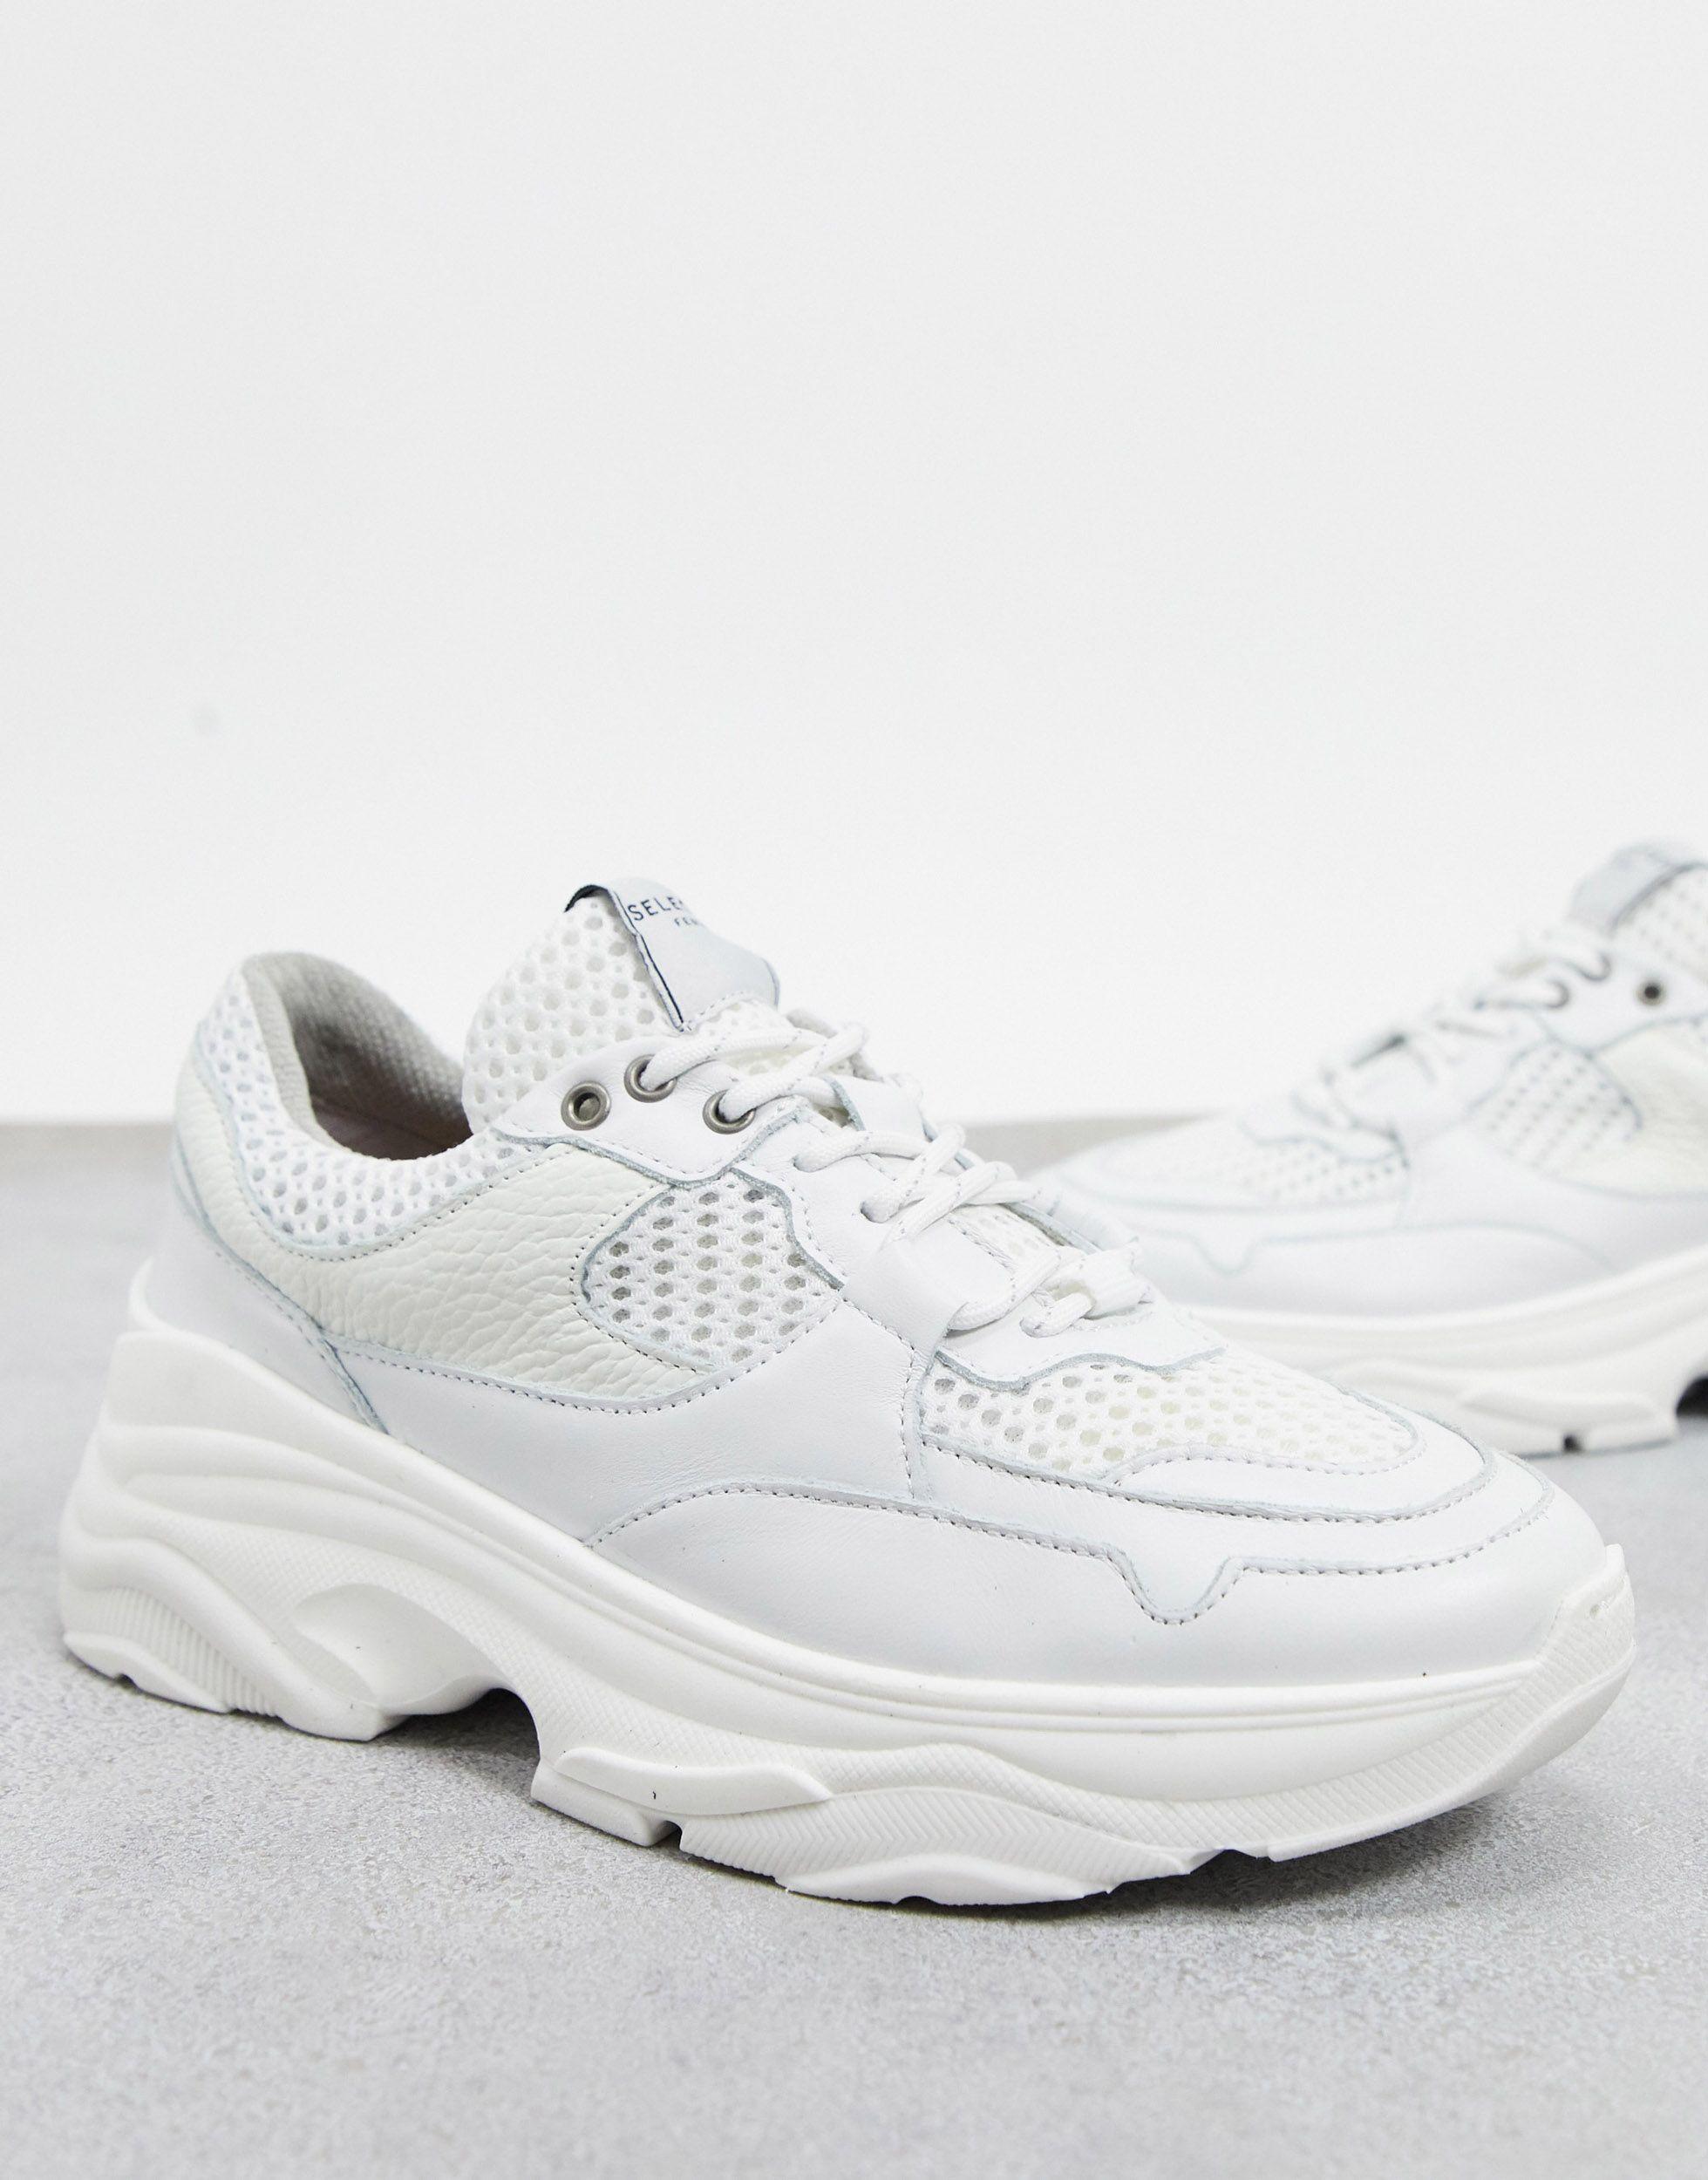 SELECTED Femme Chunky Leather Sneakers With Mesh in White - Lyst